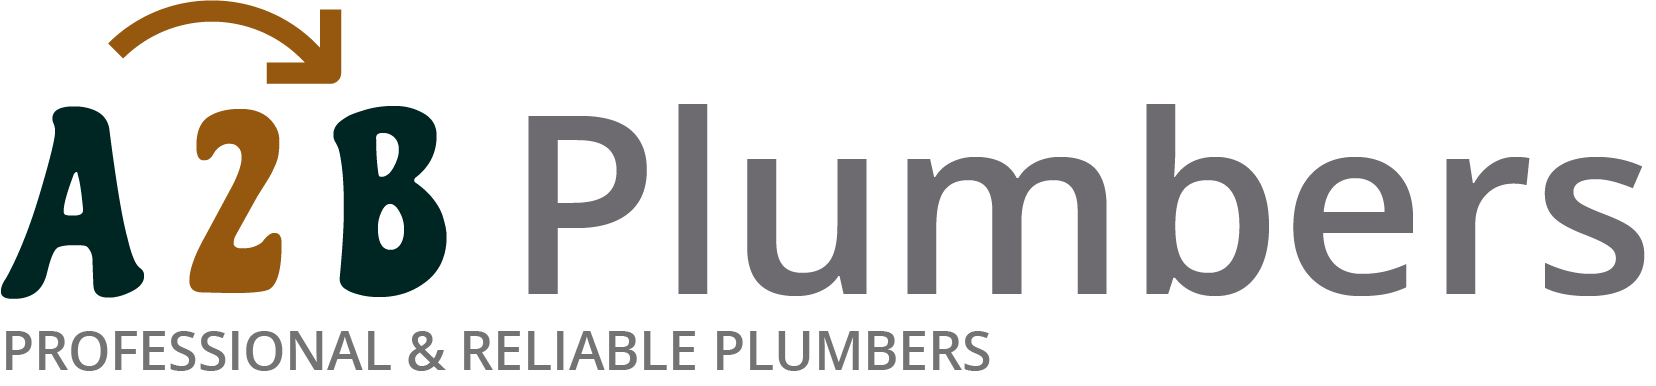 If you need a boiler installed, a radiator repaired or a leaking tap fixed, call us now - we provide services for properties in Goole and the local area.